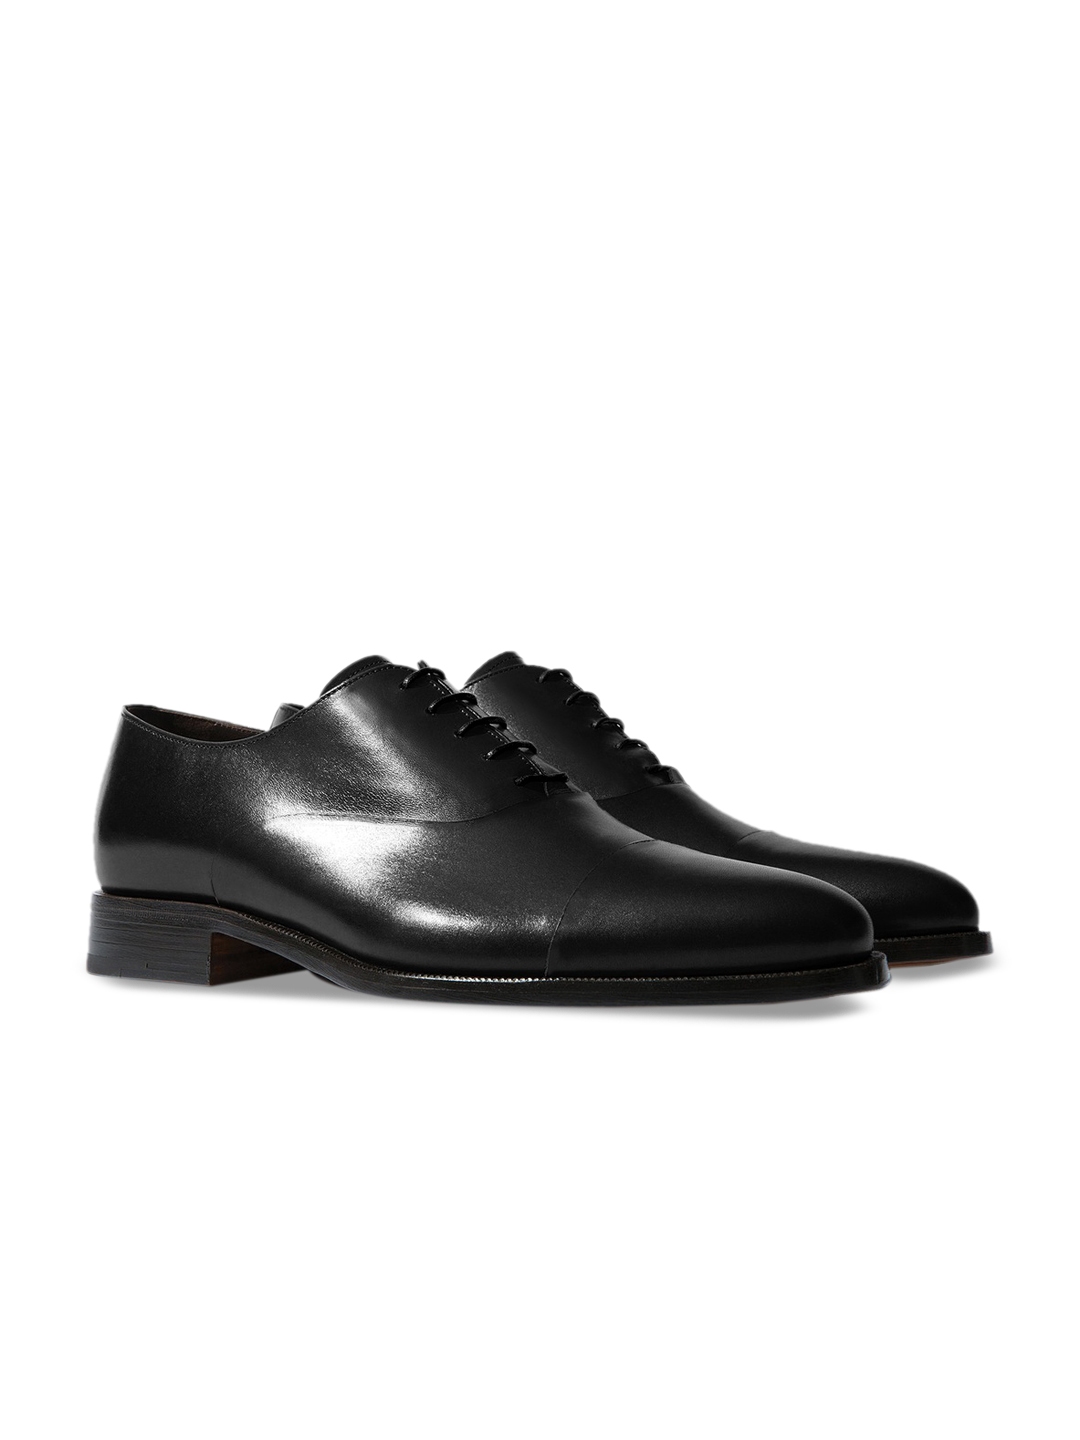 myntra hush puppies formal shoes